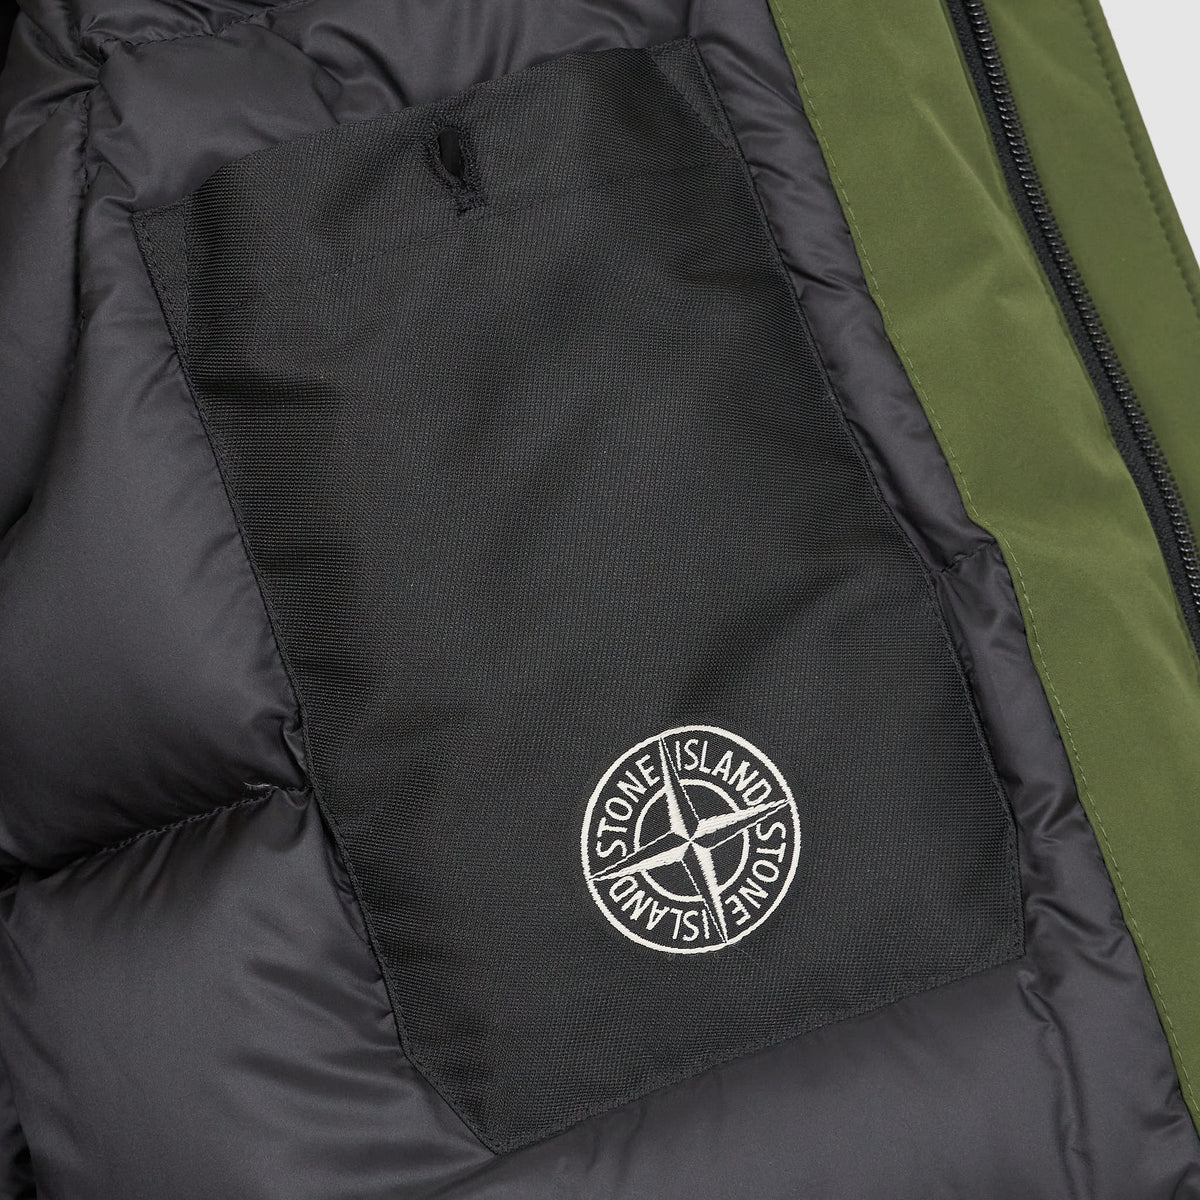 Stone Island 3L Gore-Tex Recycled Polyester Down Parka Jacket